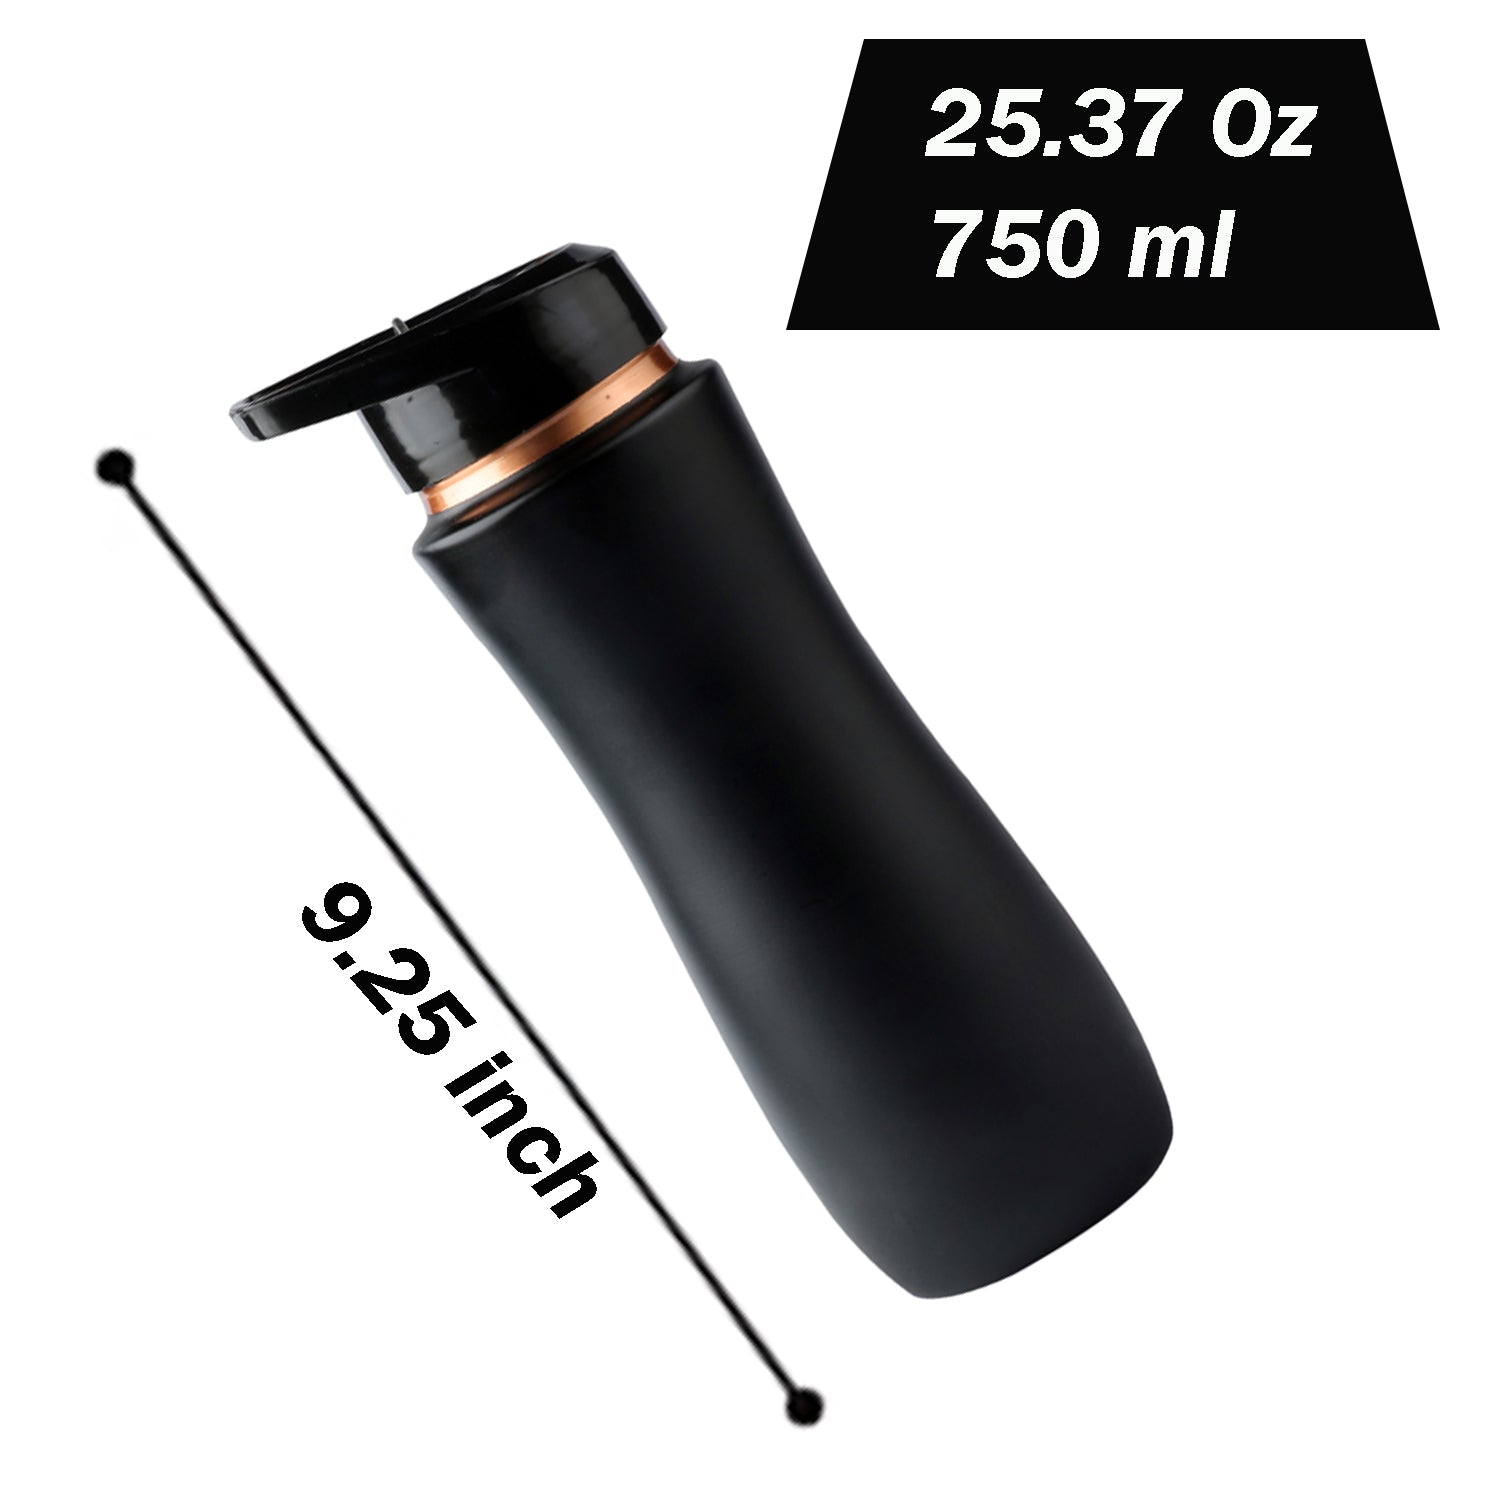 Zap impex Copper Water Bottle Sipper Pure Copper Bottle with